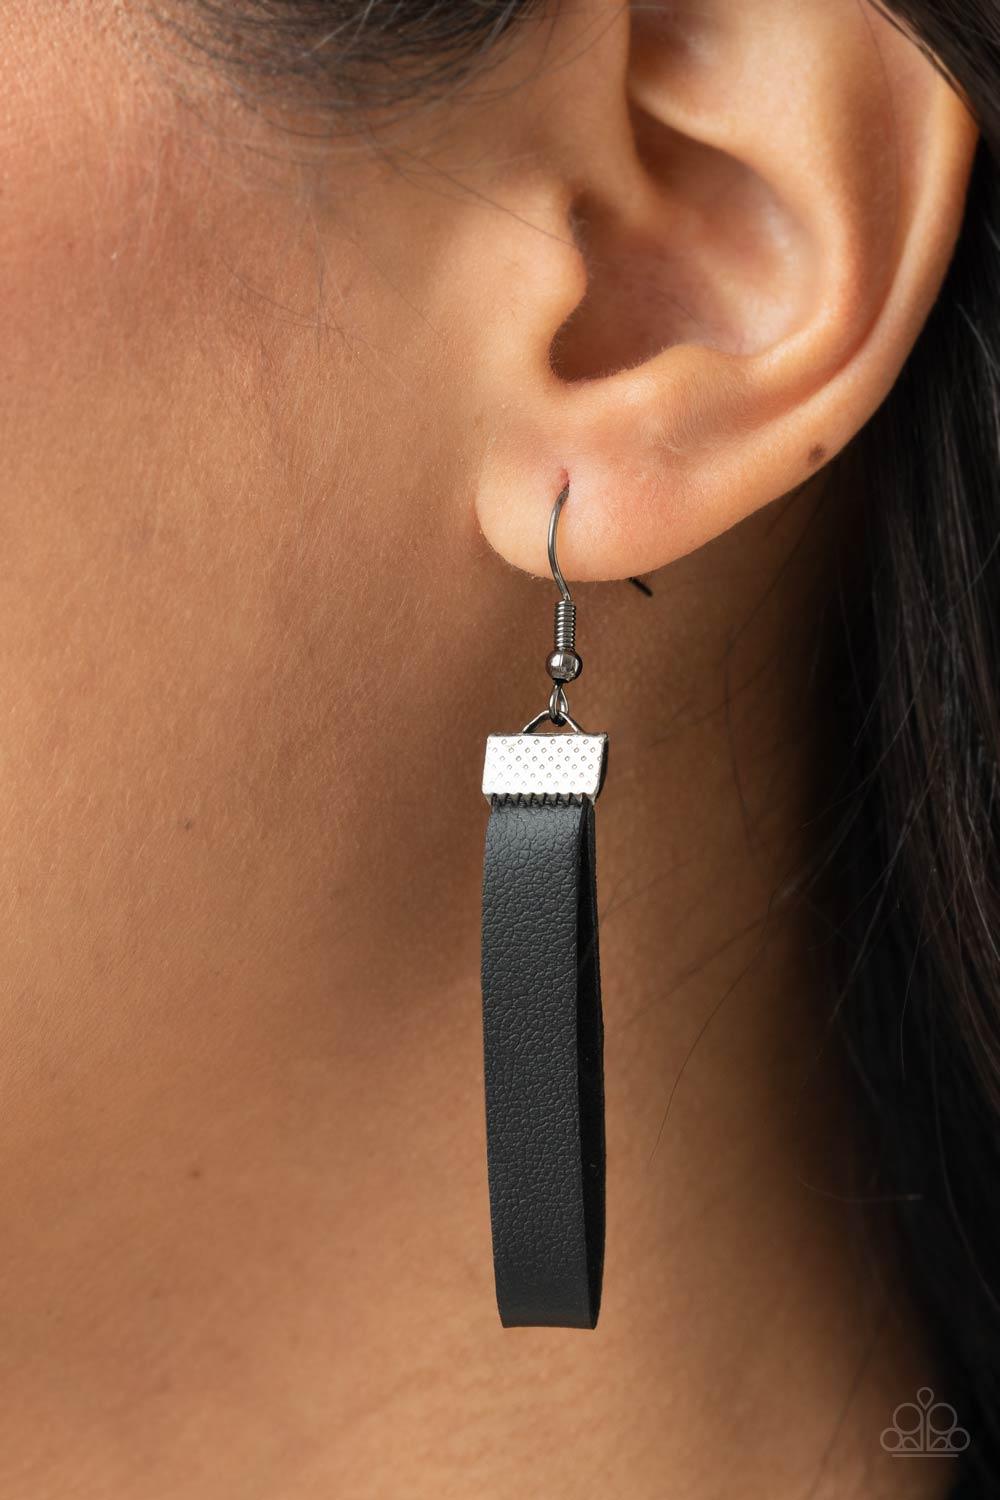 Paparazzi Accessories Majorly Moonstruck - Black Infused with glistening gunmetal beads, strips of black leather link to an oversized half moon pendant that is hammered in a blinding gunmetal finish, creating an edgy statement piece below the collar. Feat